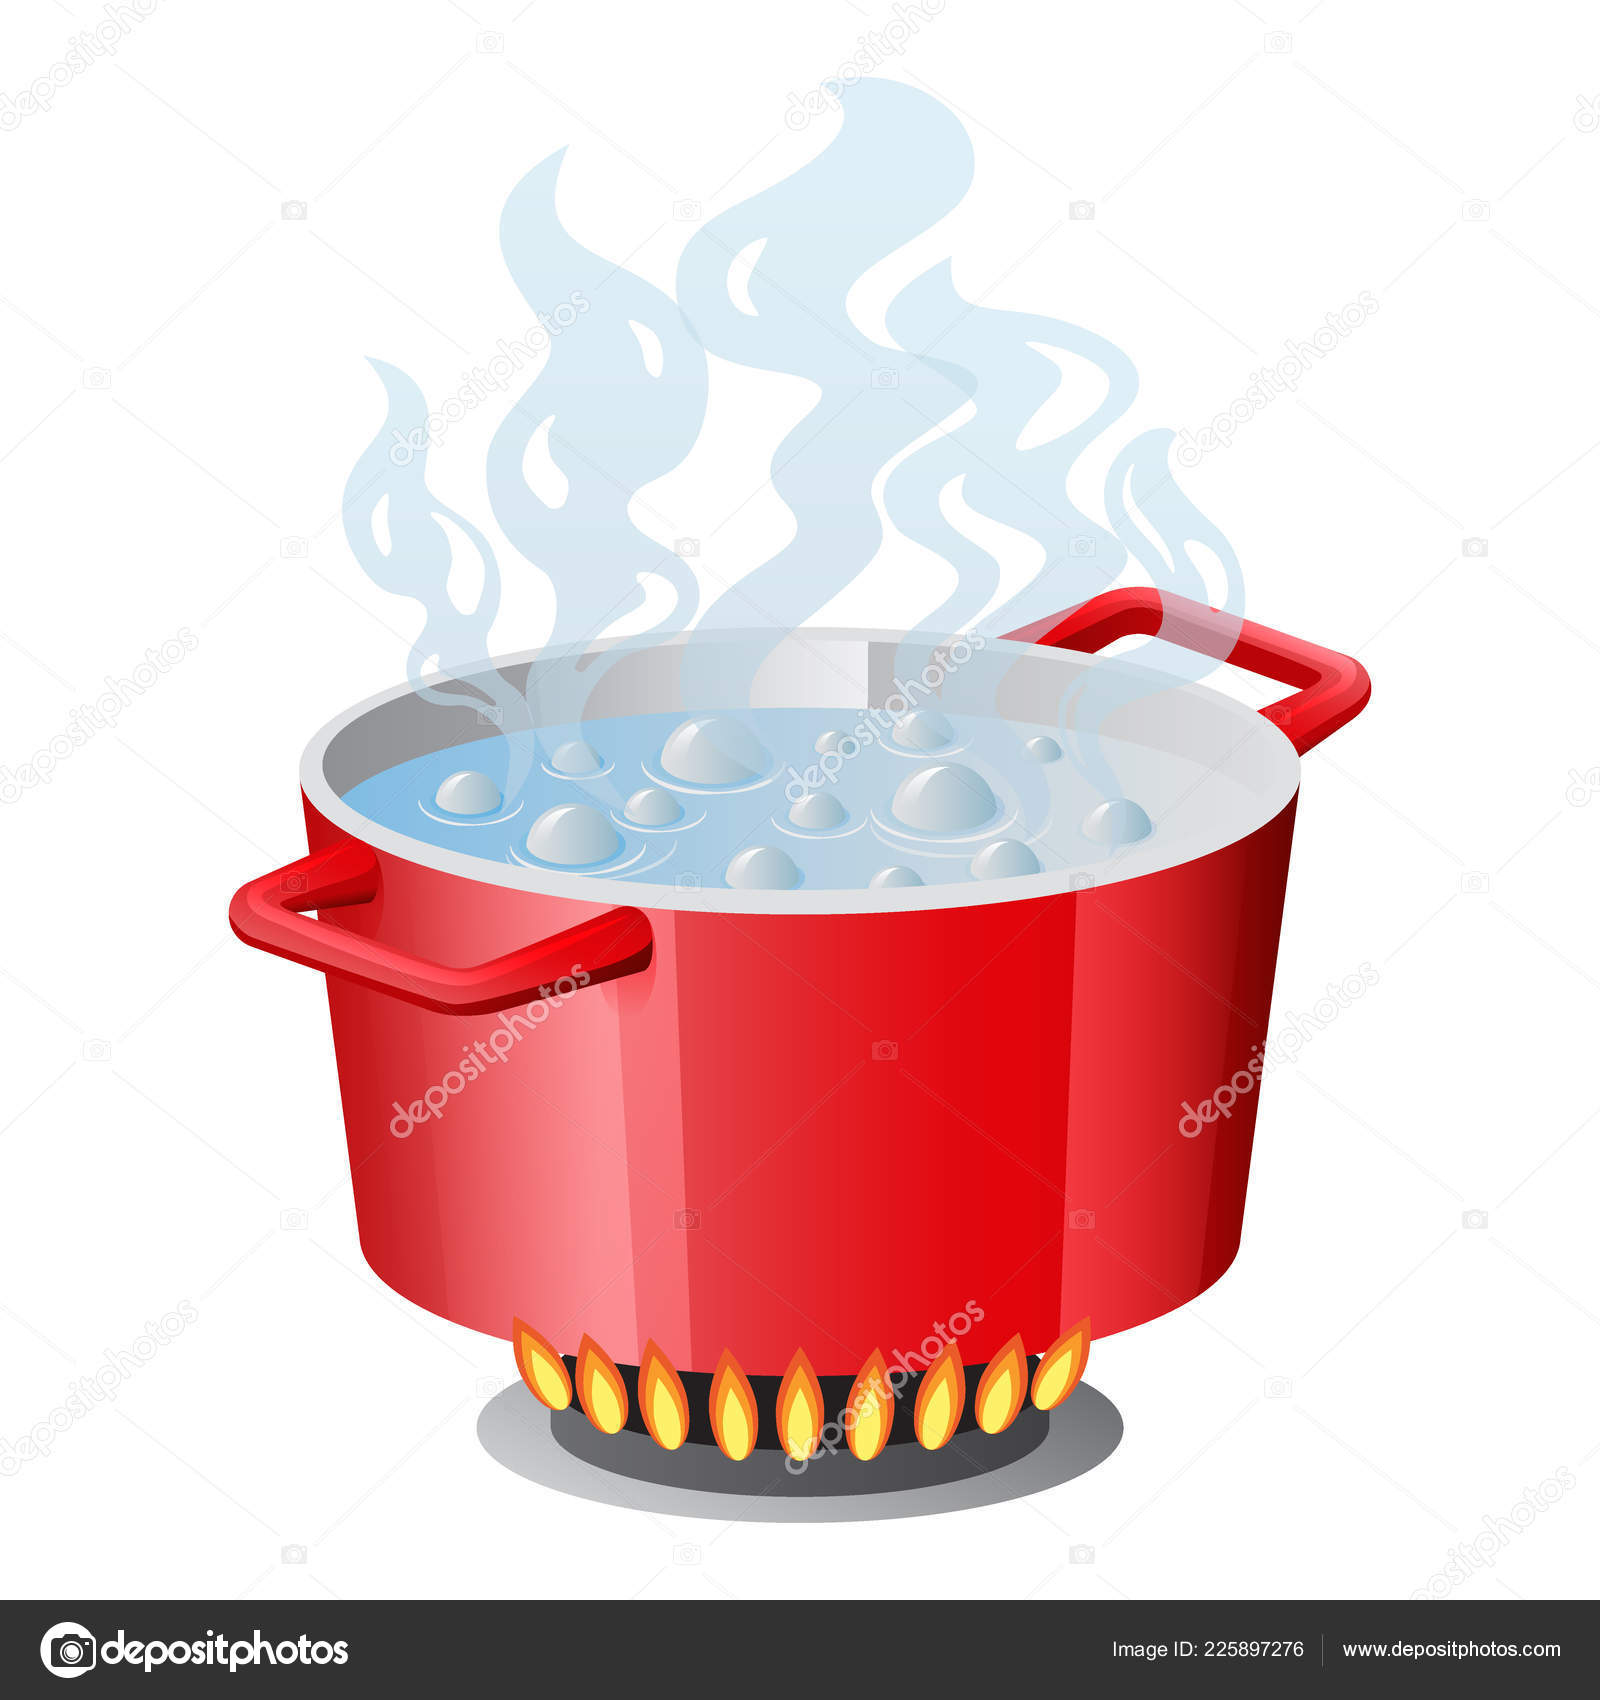 Boiling water in pan. Cooking pot on stove with water and steam